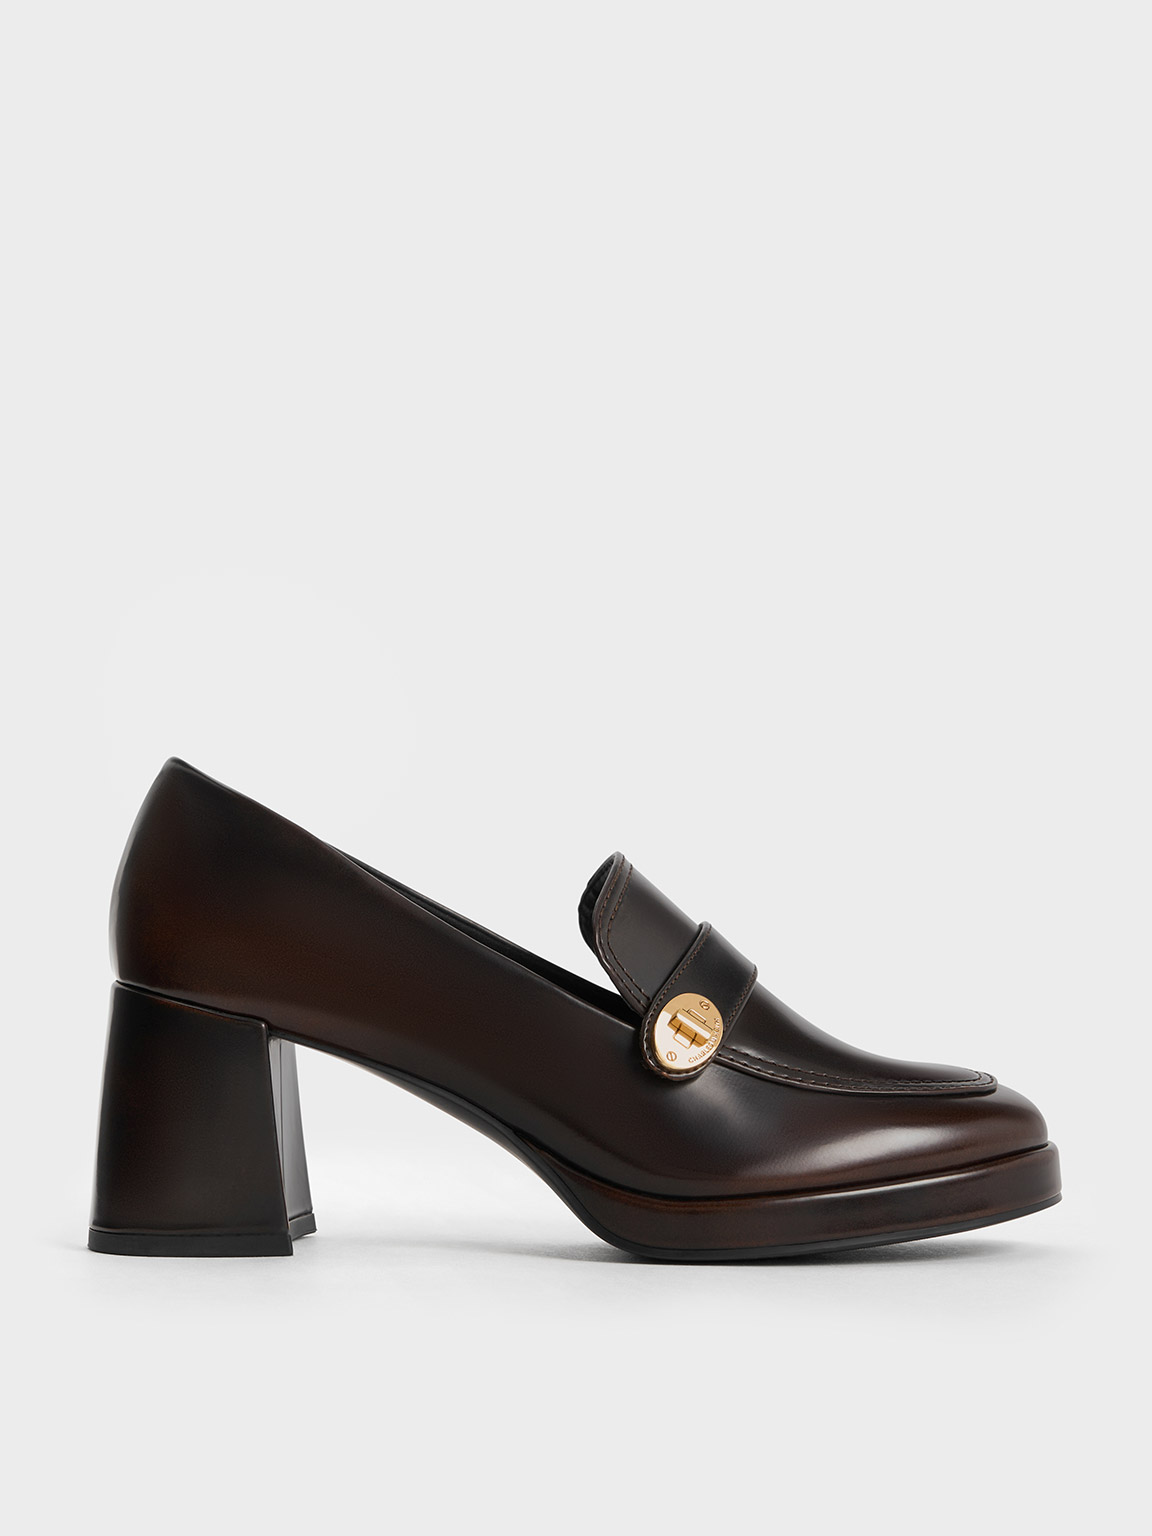 Charles & Keith Metallic Accent Loafer Pumps In Brown